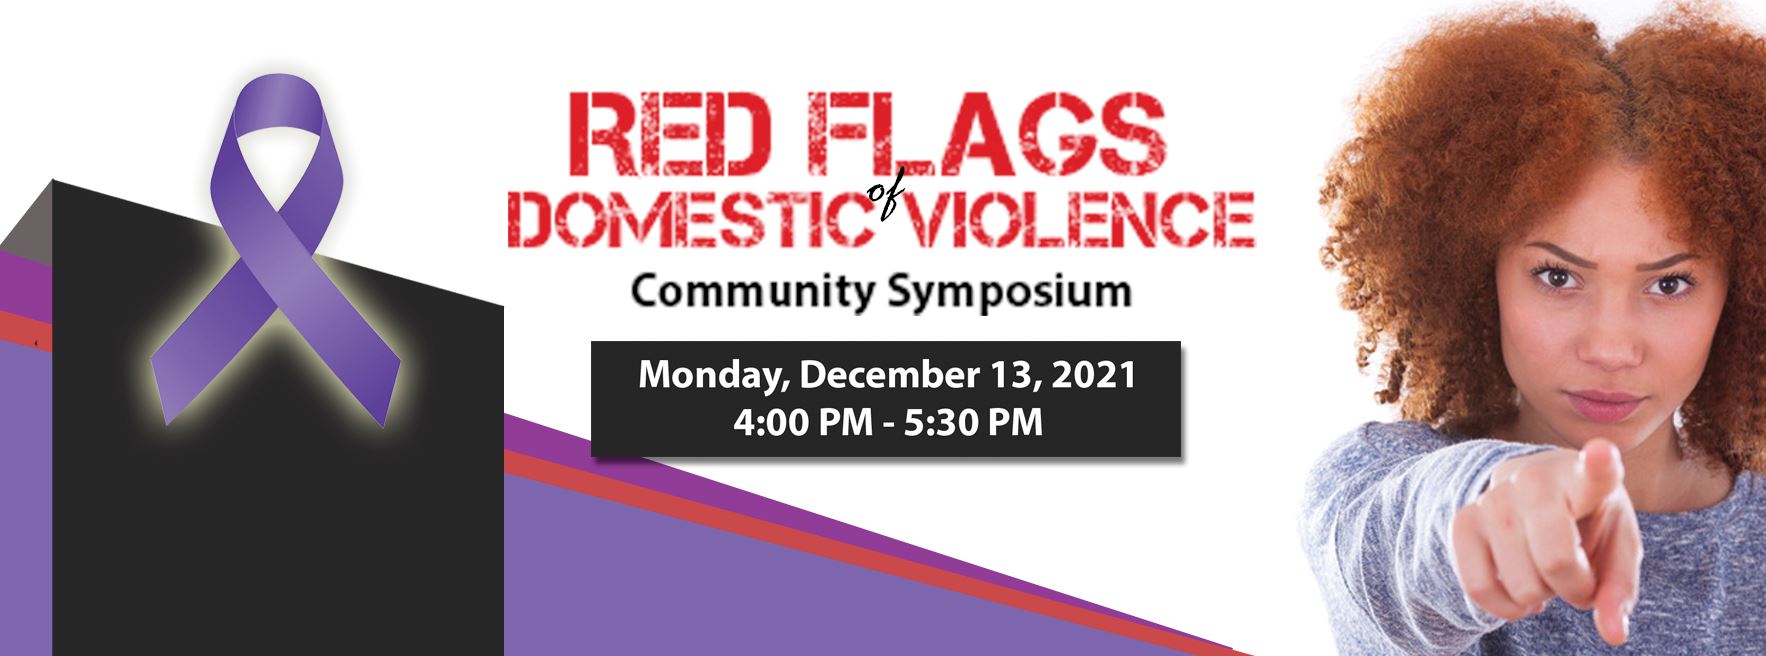 Red Flags Banner